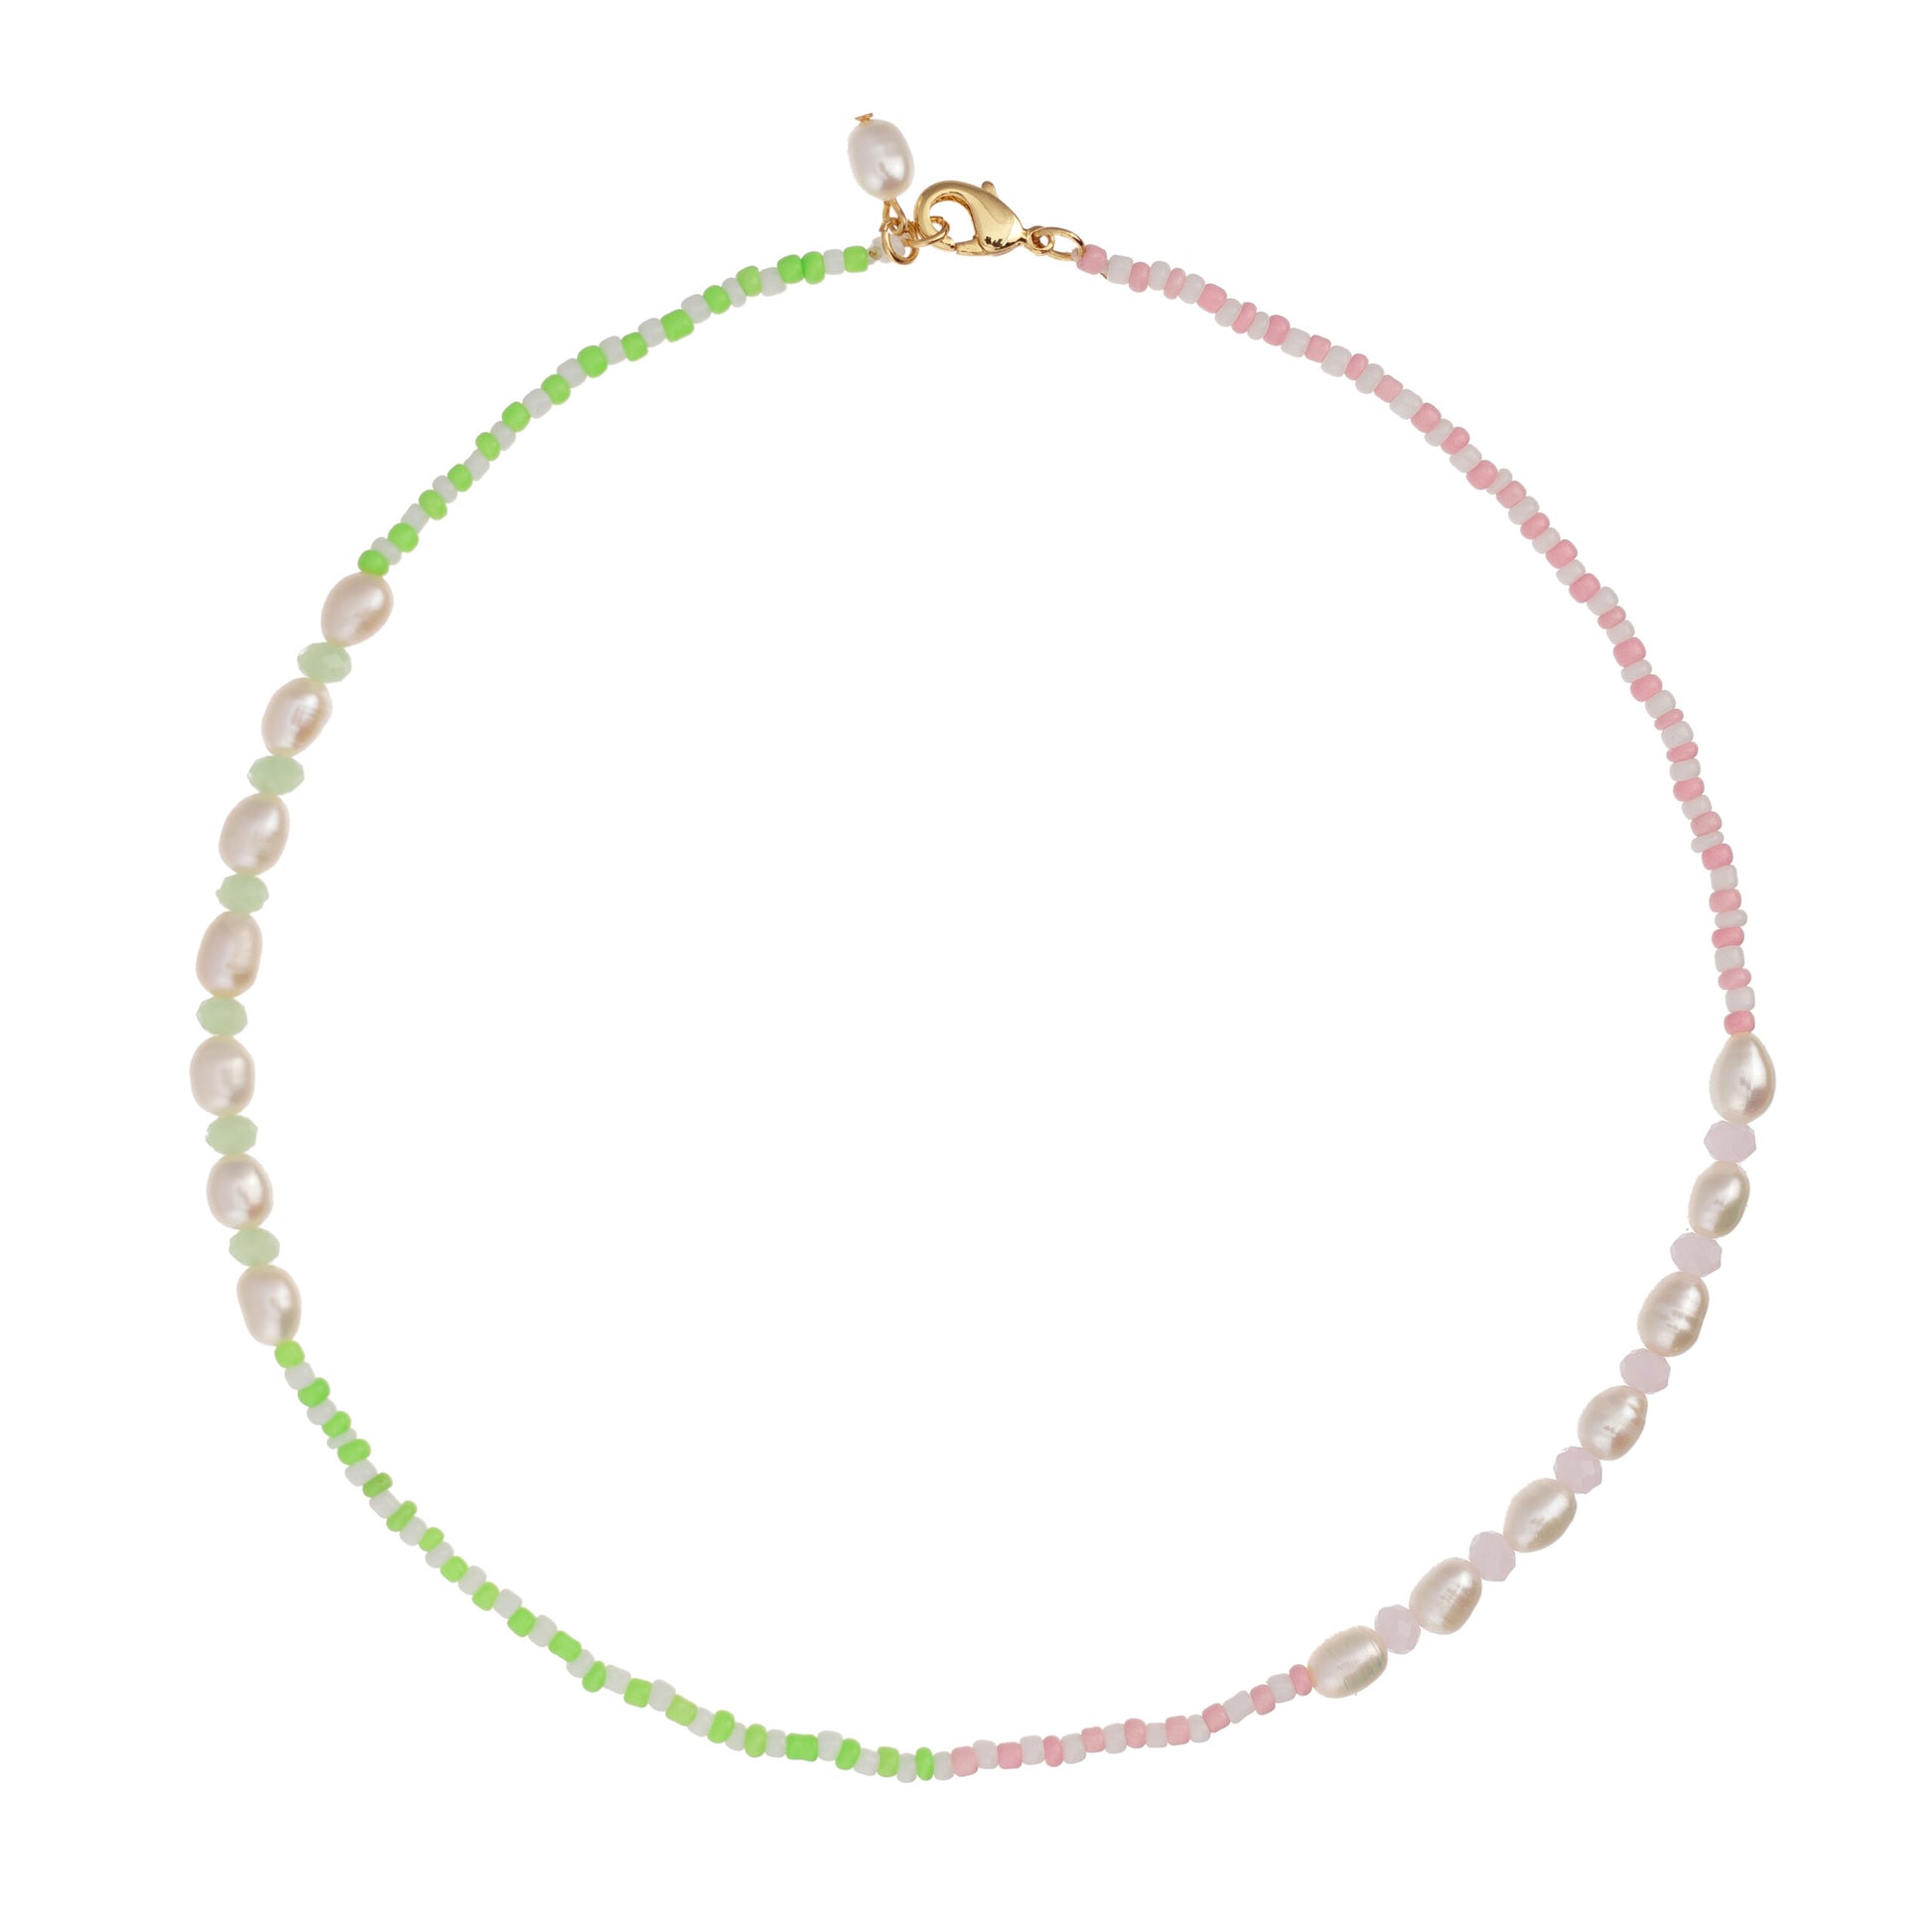 A Tulum Beaded Pearl Necklace - Neon by Talis Chains, featuring gold-plating.